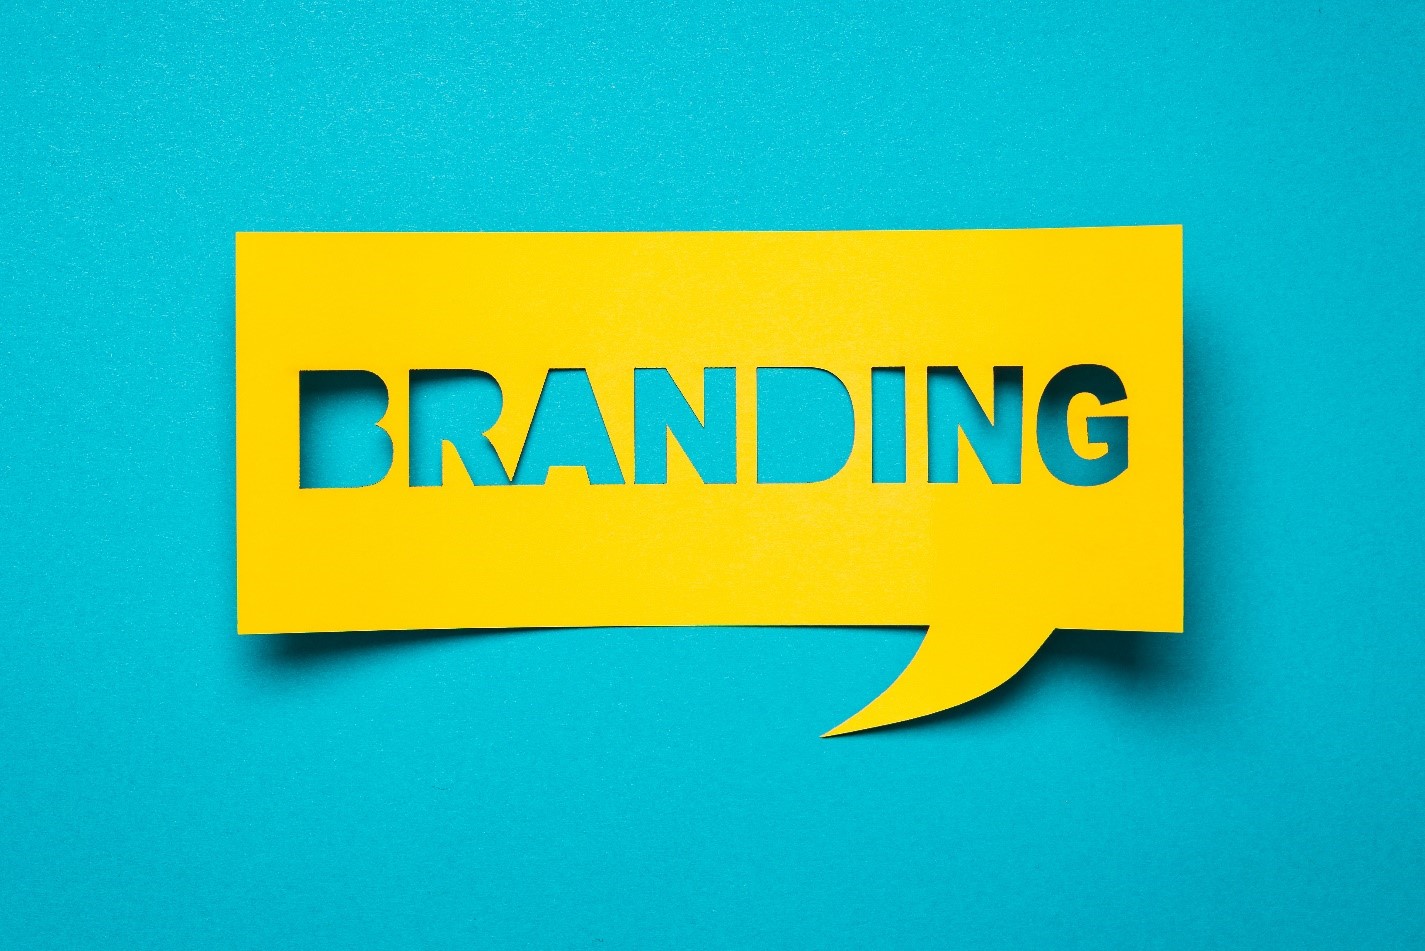 the word "Branding" cut out of yellow paper